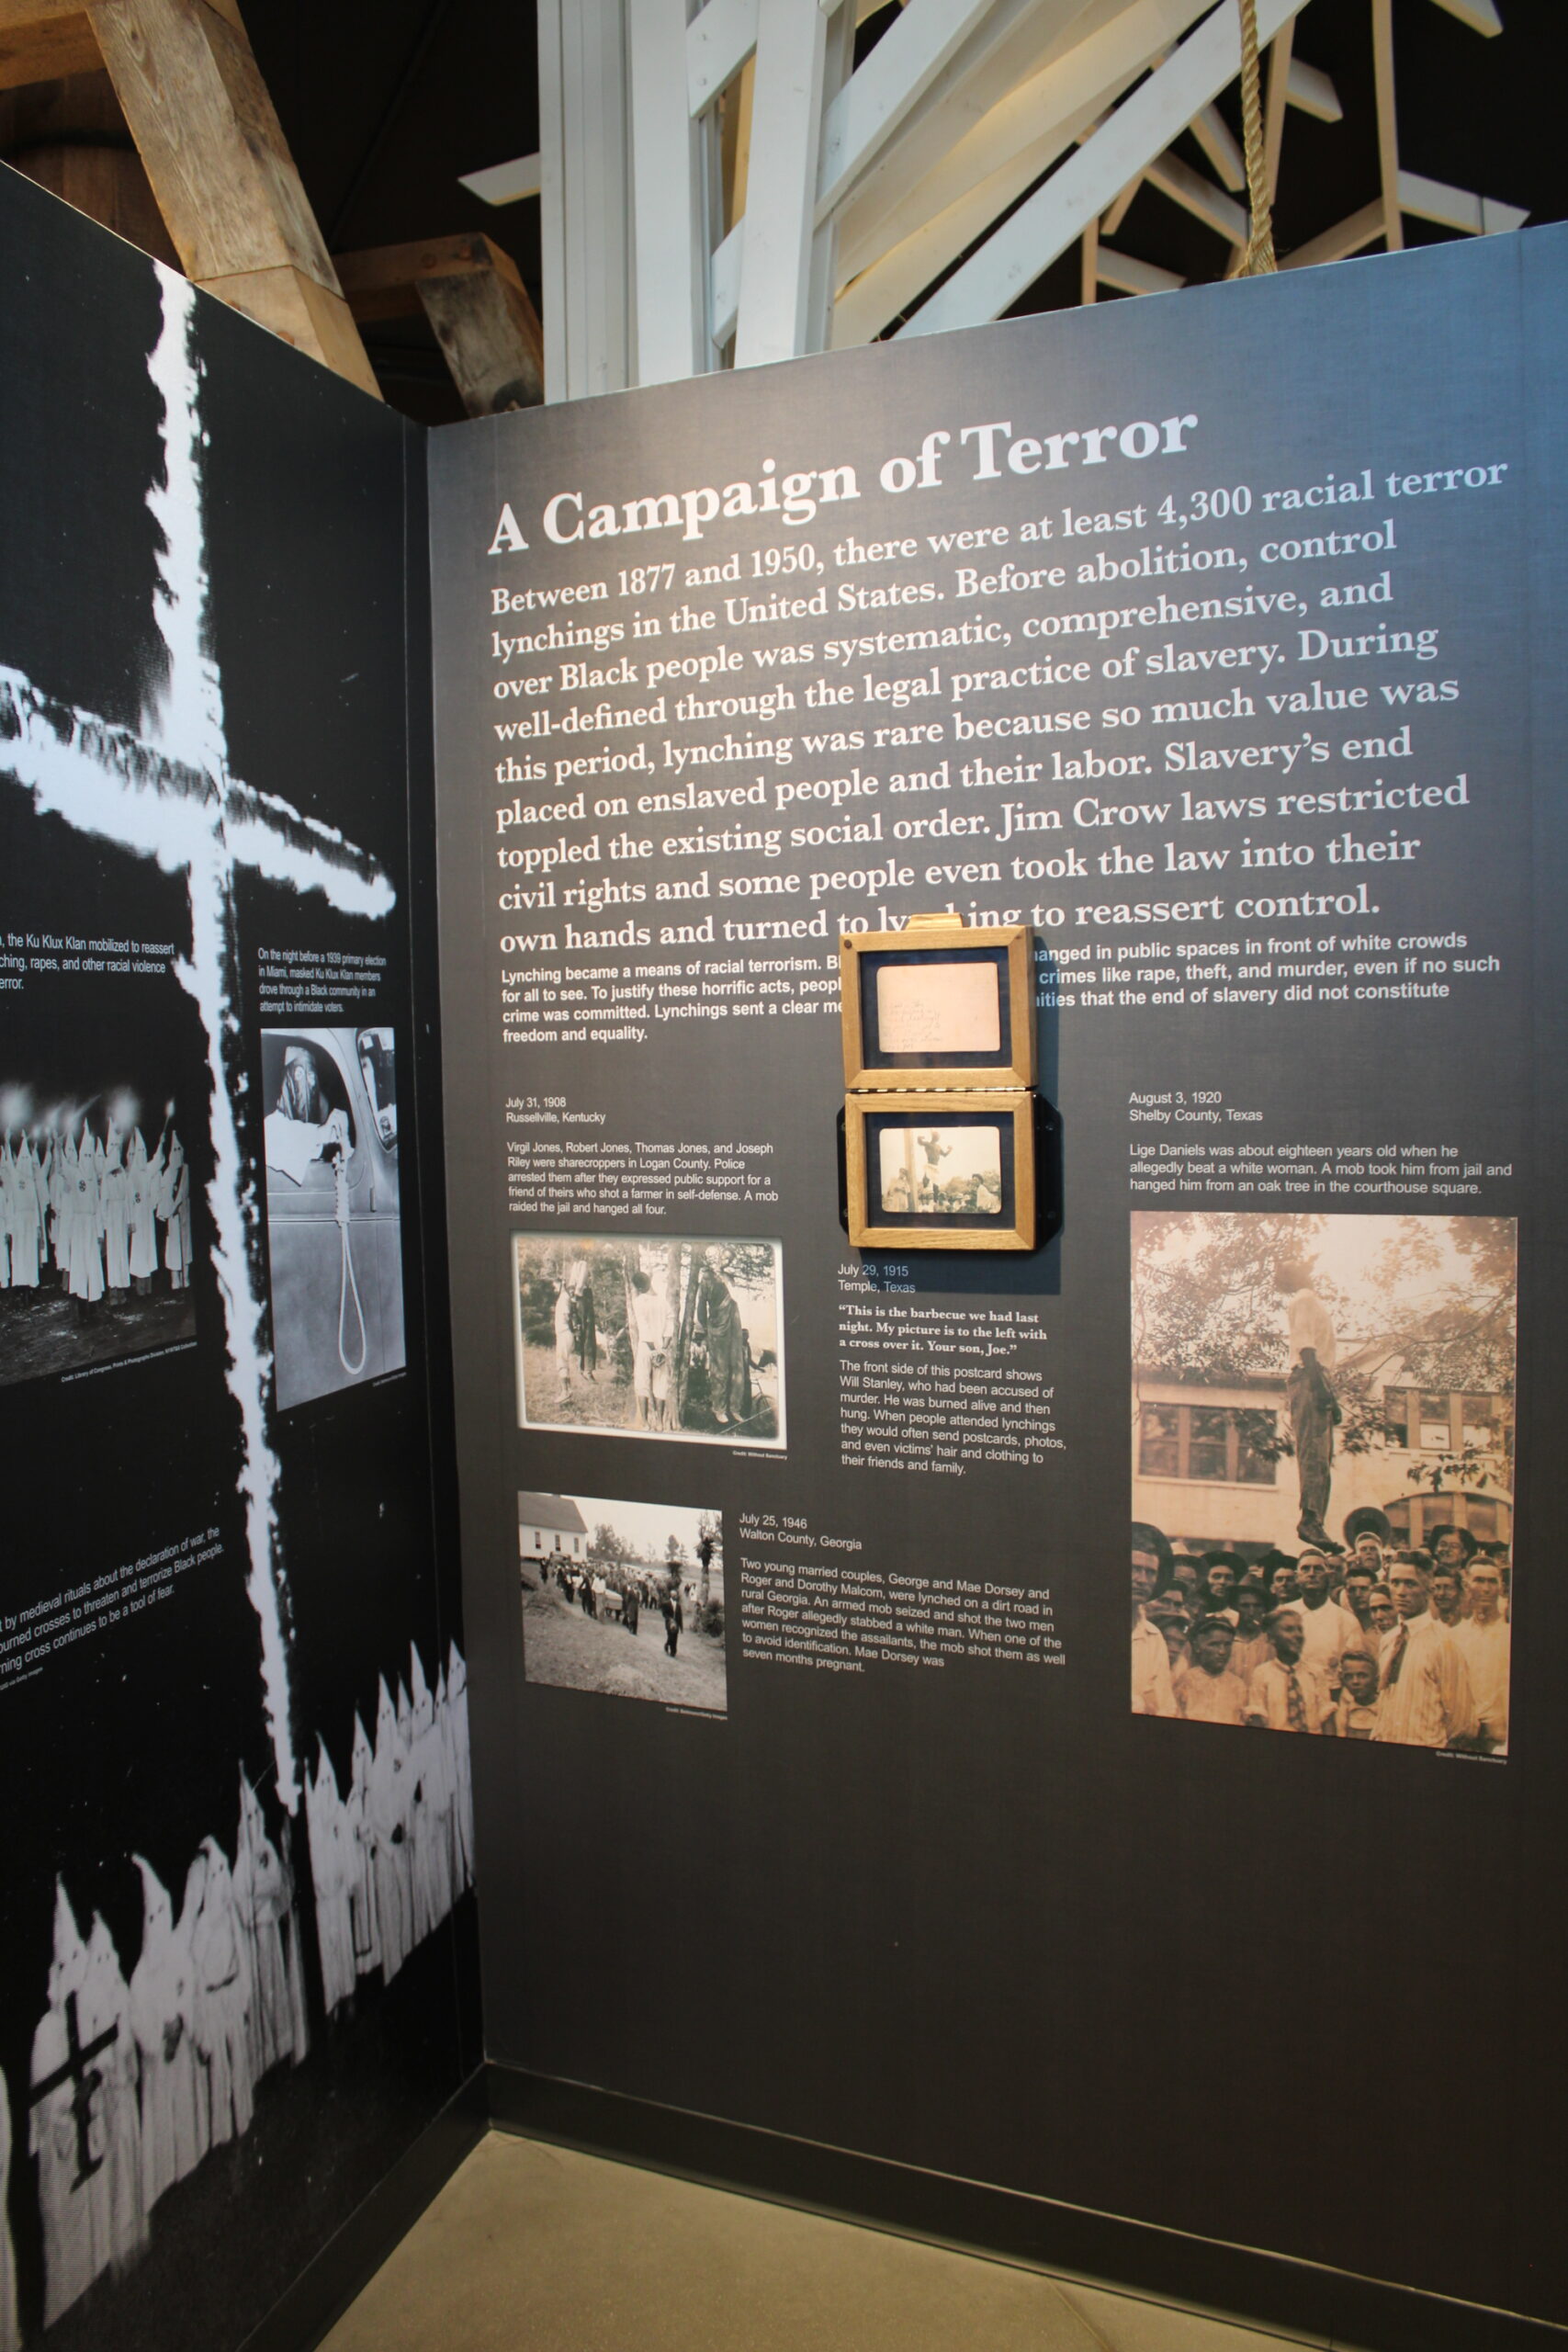 A museum display wall with text and photos. The title on the display wall reads "a campaign of terror" and has black and white archival photos.